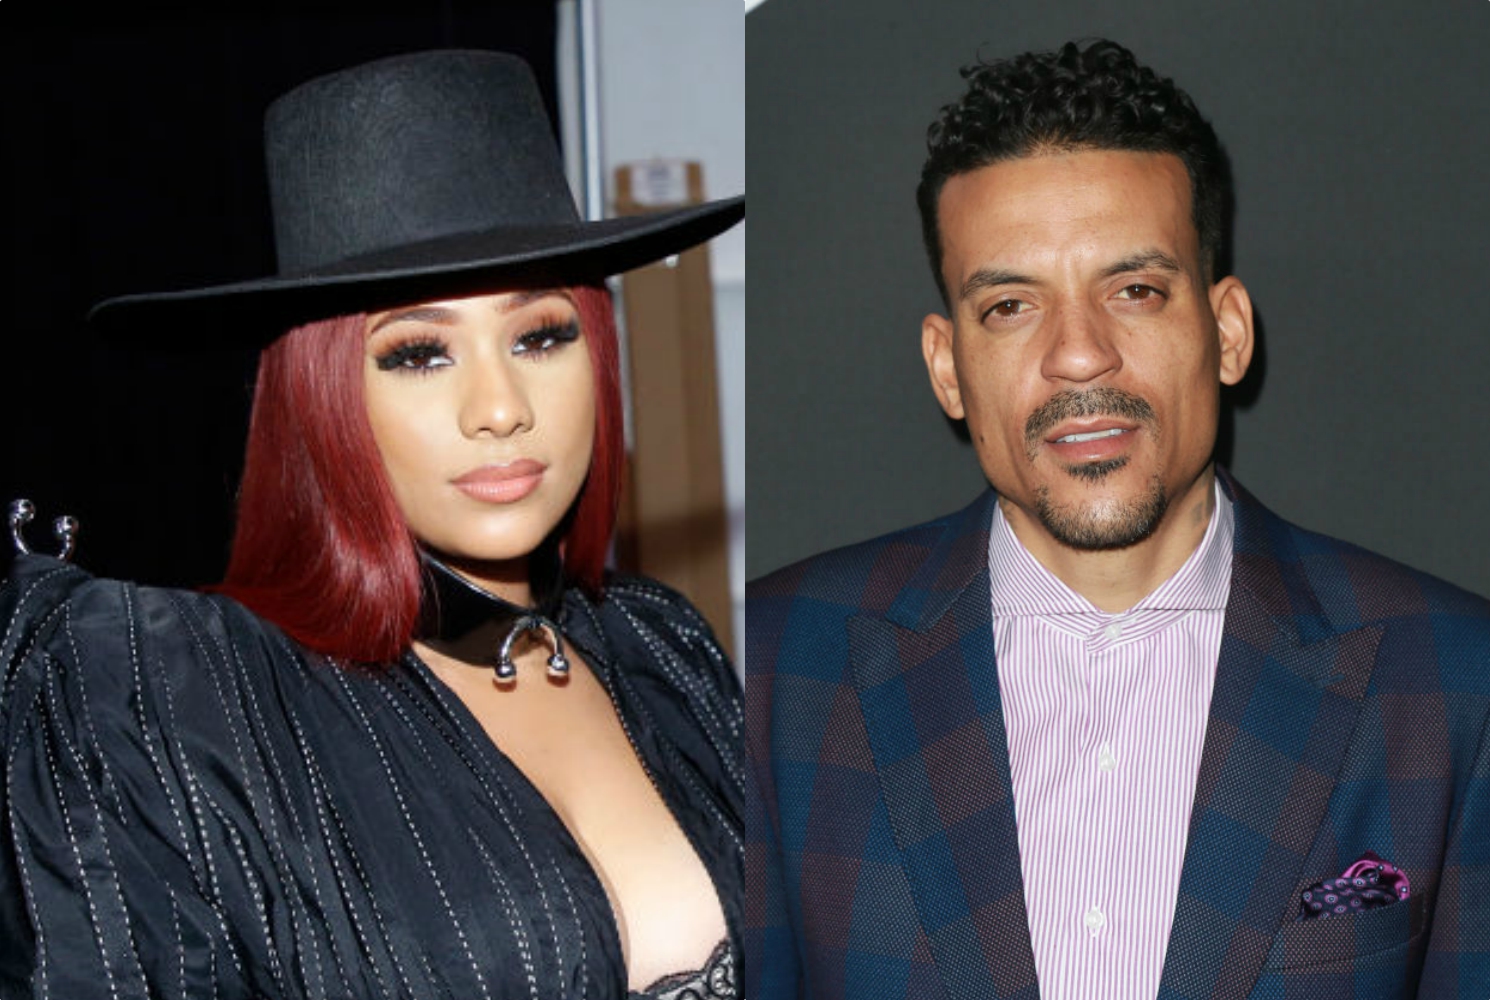 Is Matt Barnes Dating Cyn Santana? The Subtle Clue These Two May Be An Item